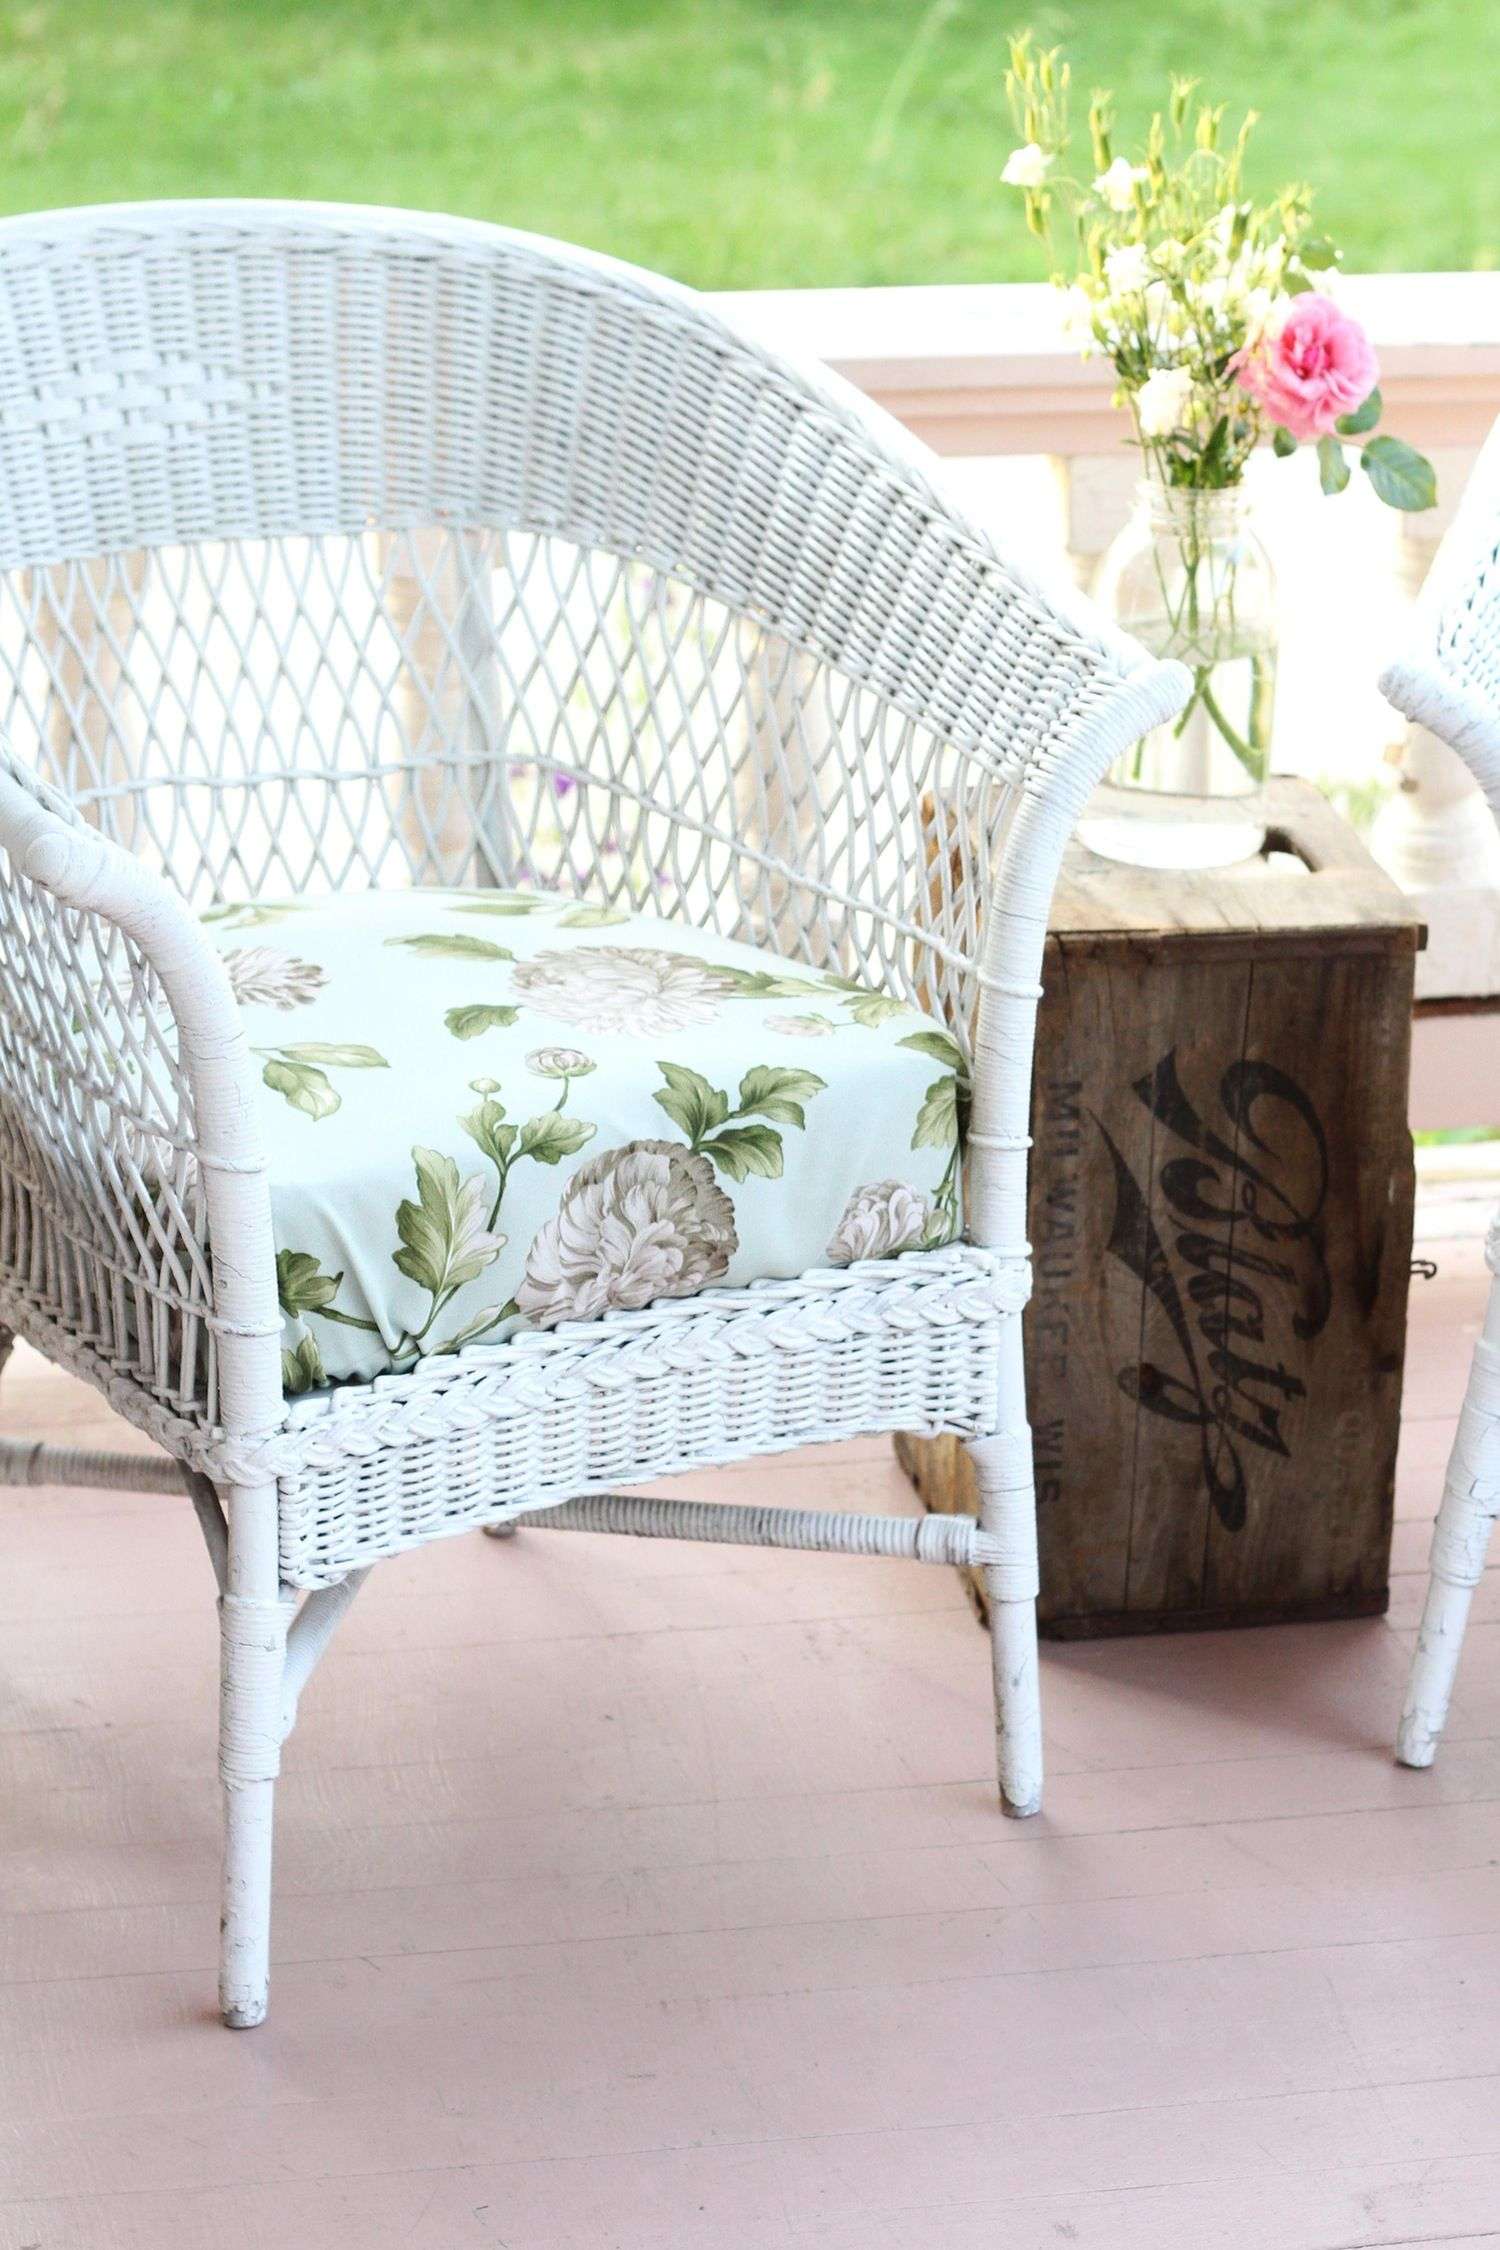 How To Clean Patio Furniture